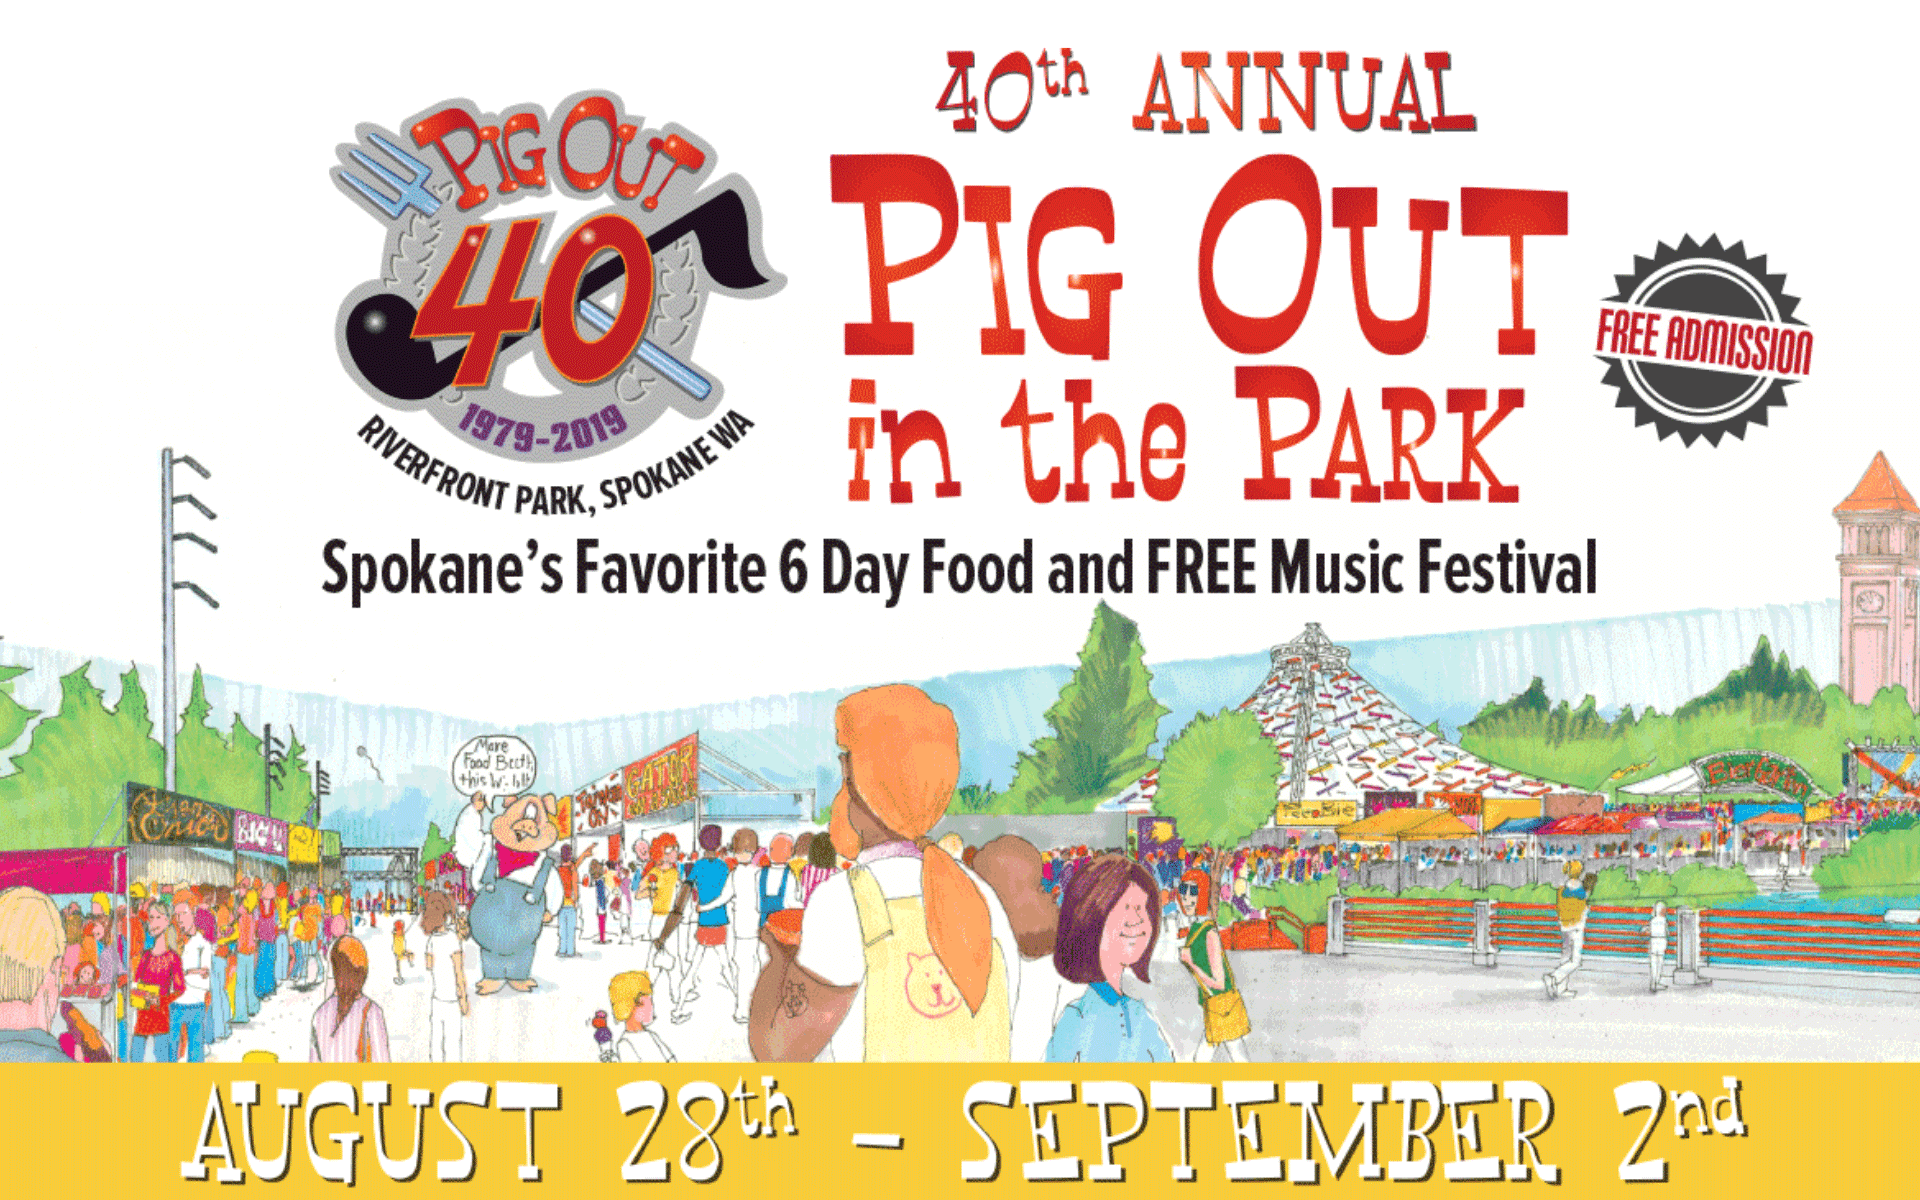 Pig Out in the Park City of Spokane, Washington